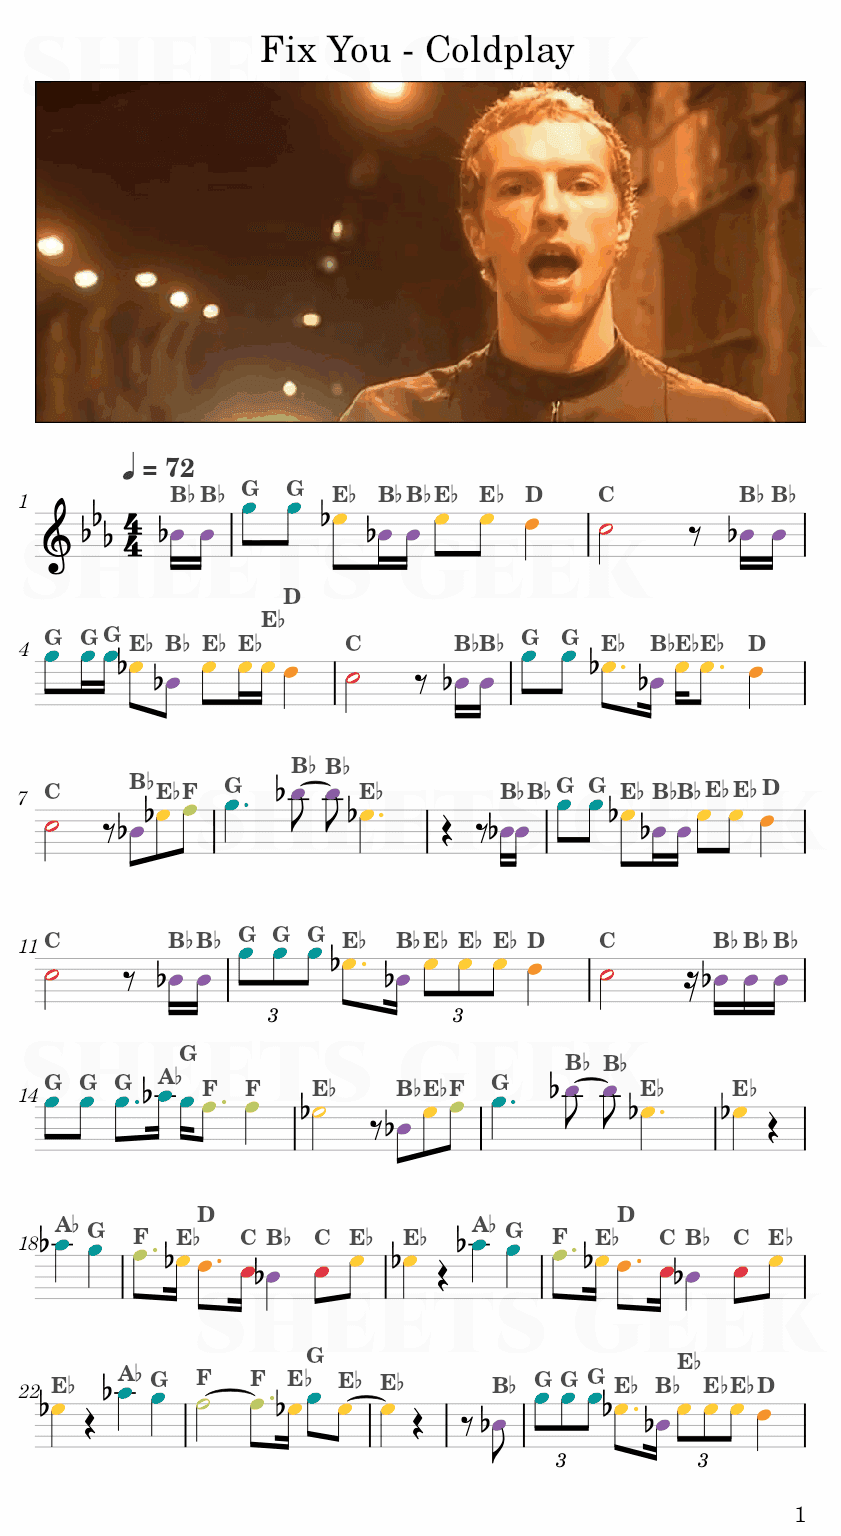 Fix You - Coldplay Easy Sheet Music Free for piano, keyboard, flute, violin, sax, cello page 1